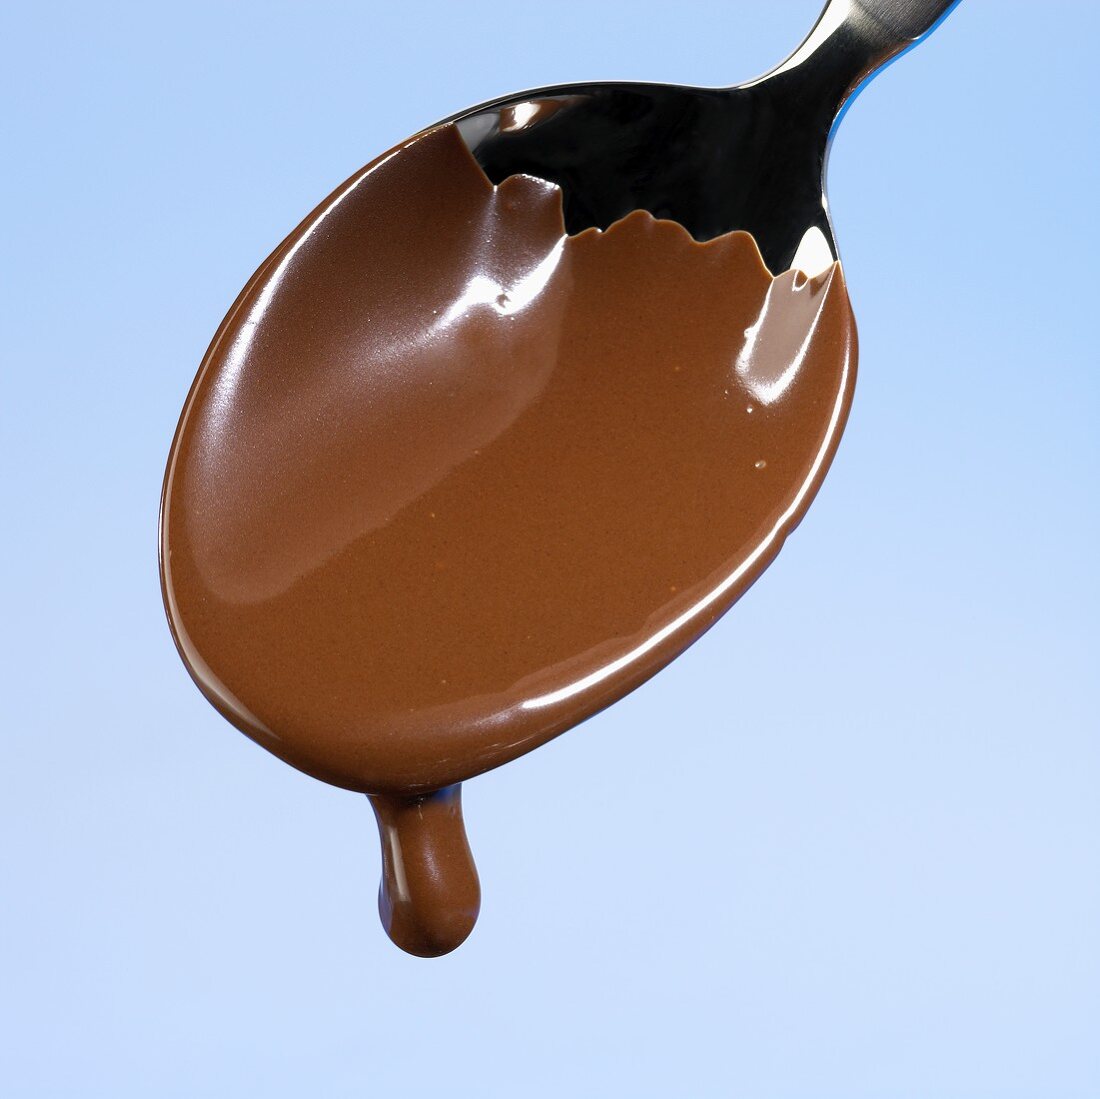 Chocolate dripping from a spoon